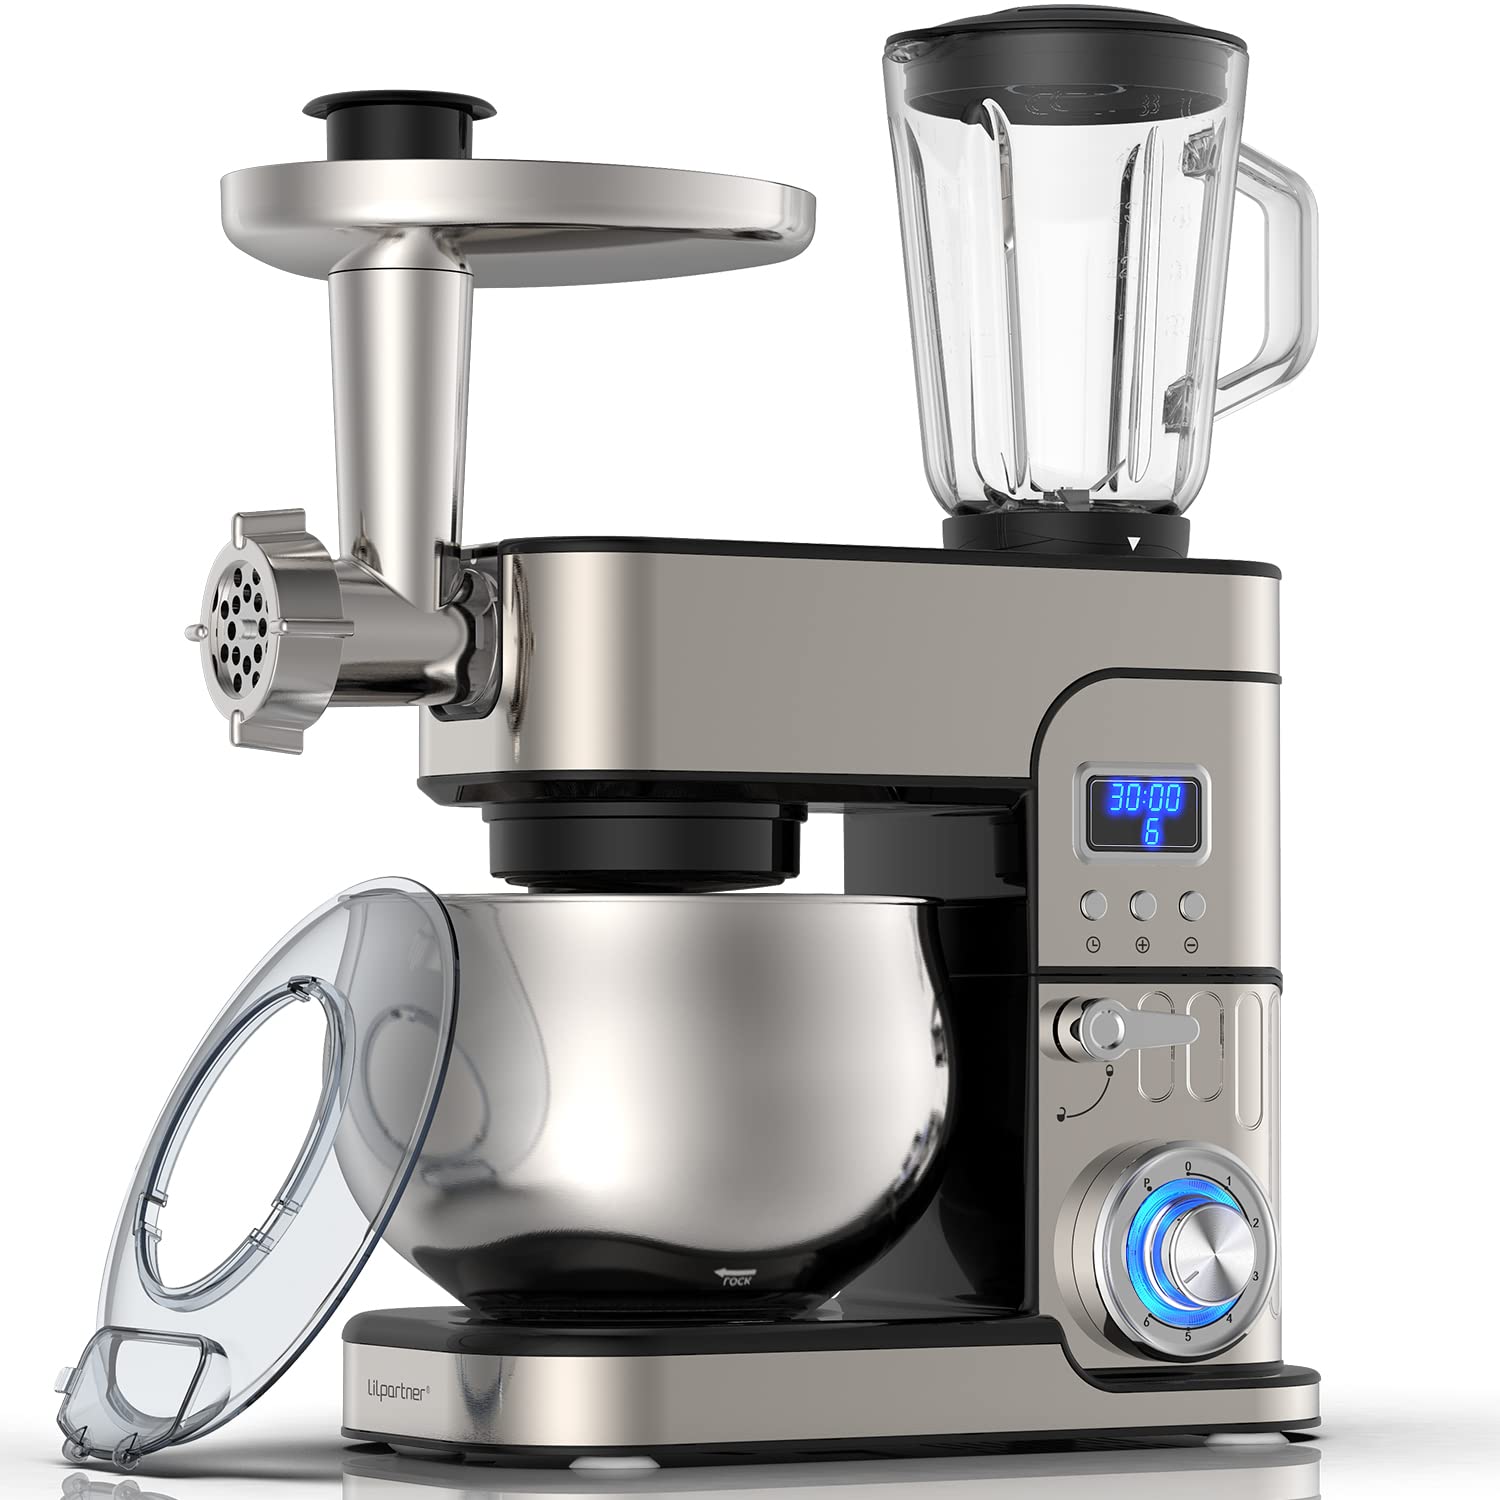 Shoppers Love the Aucma Stand Mixer